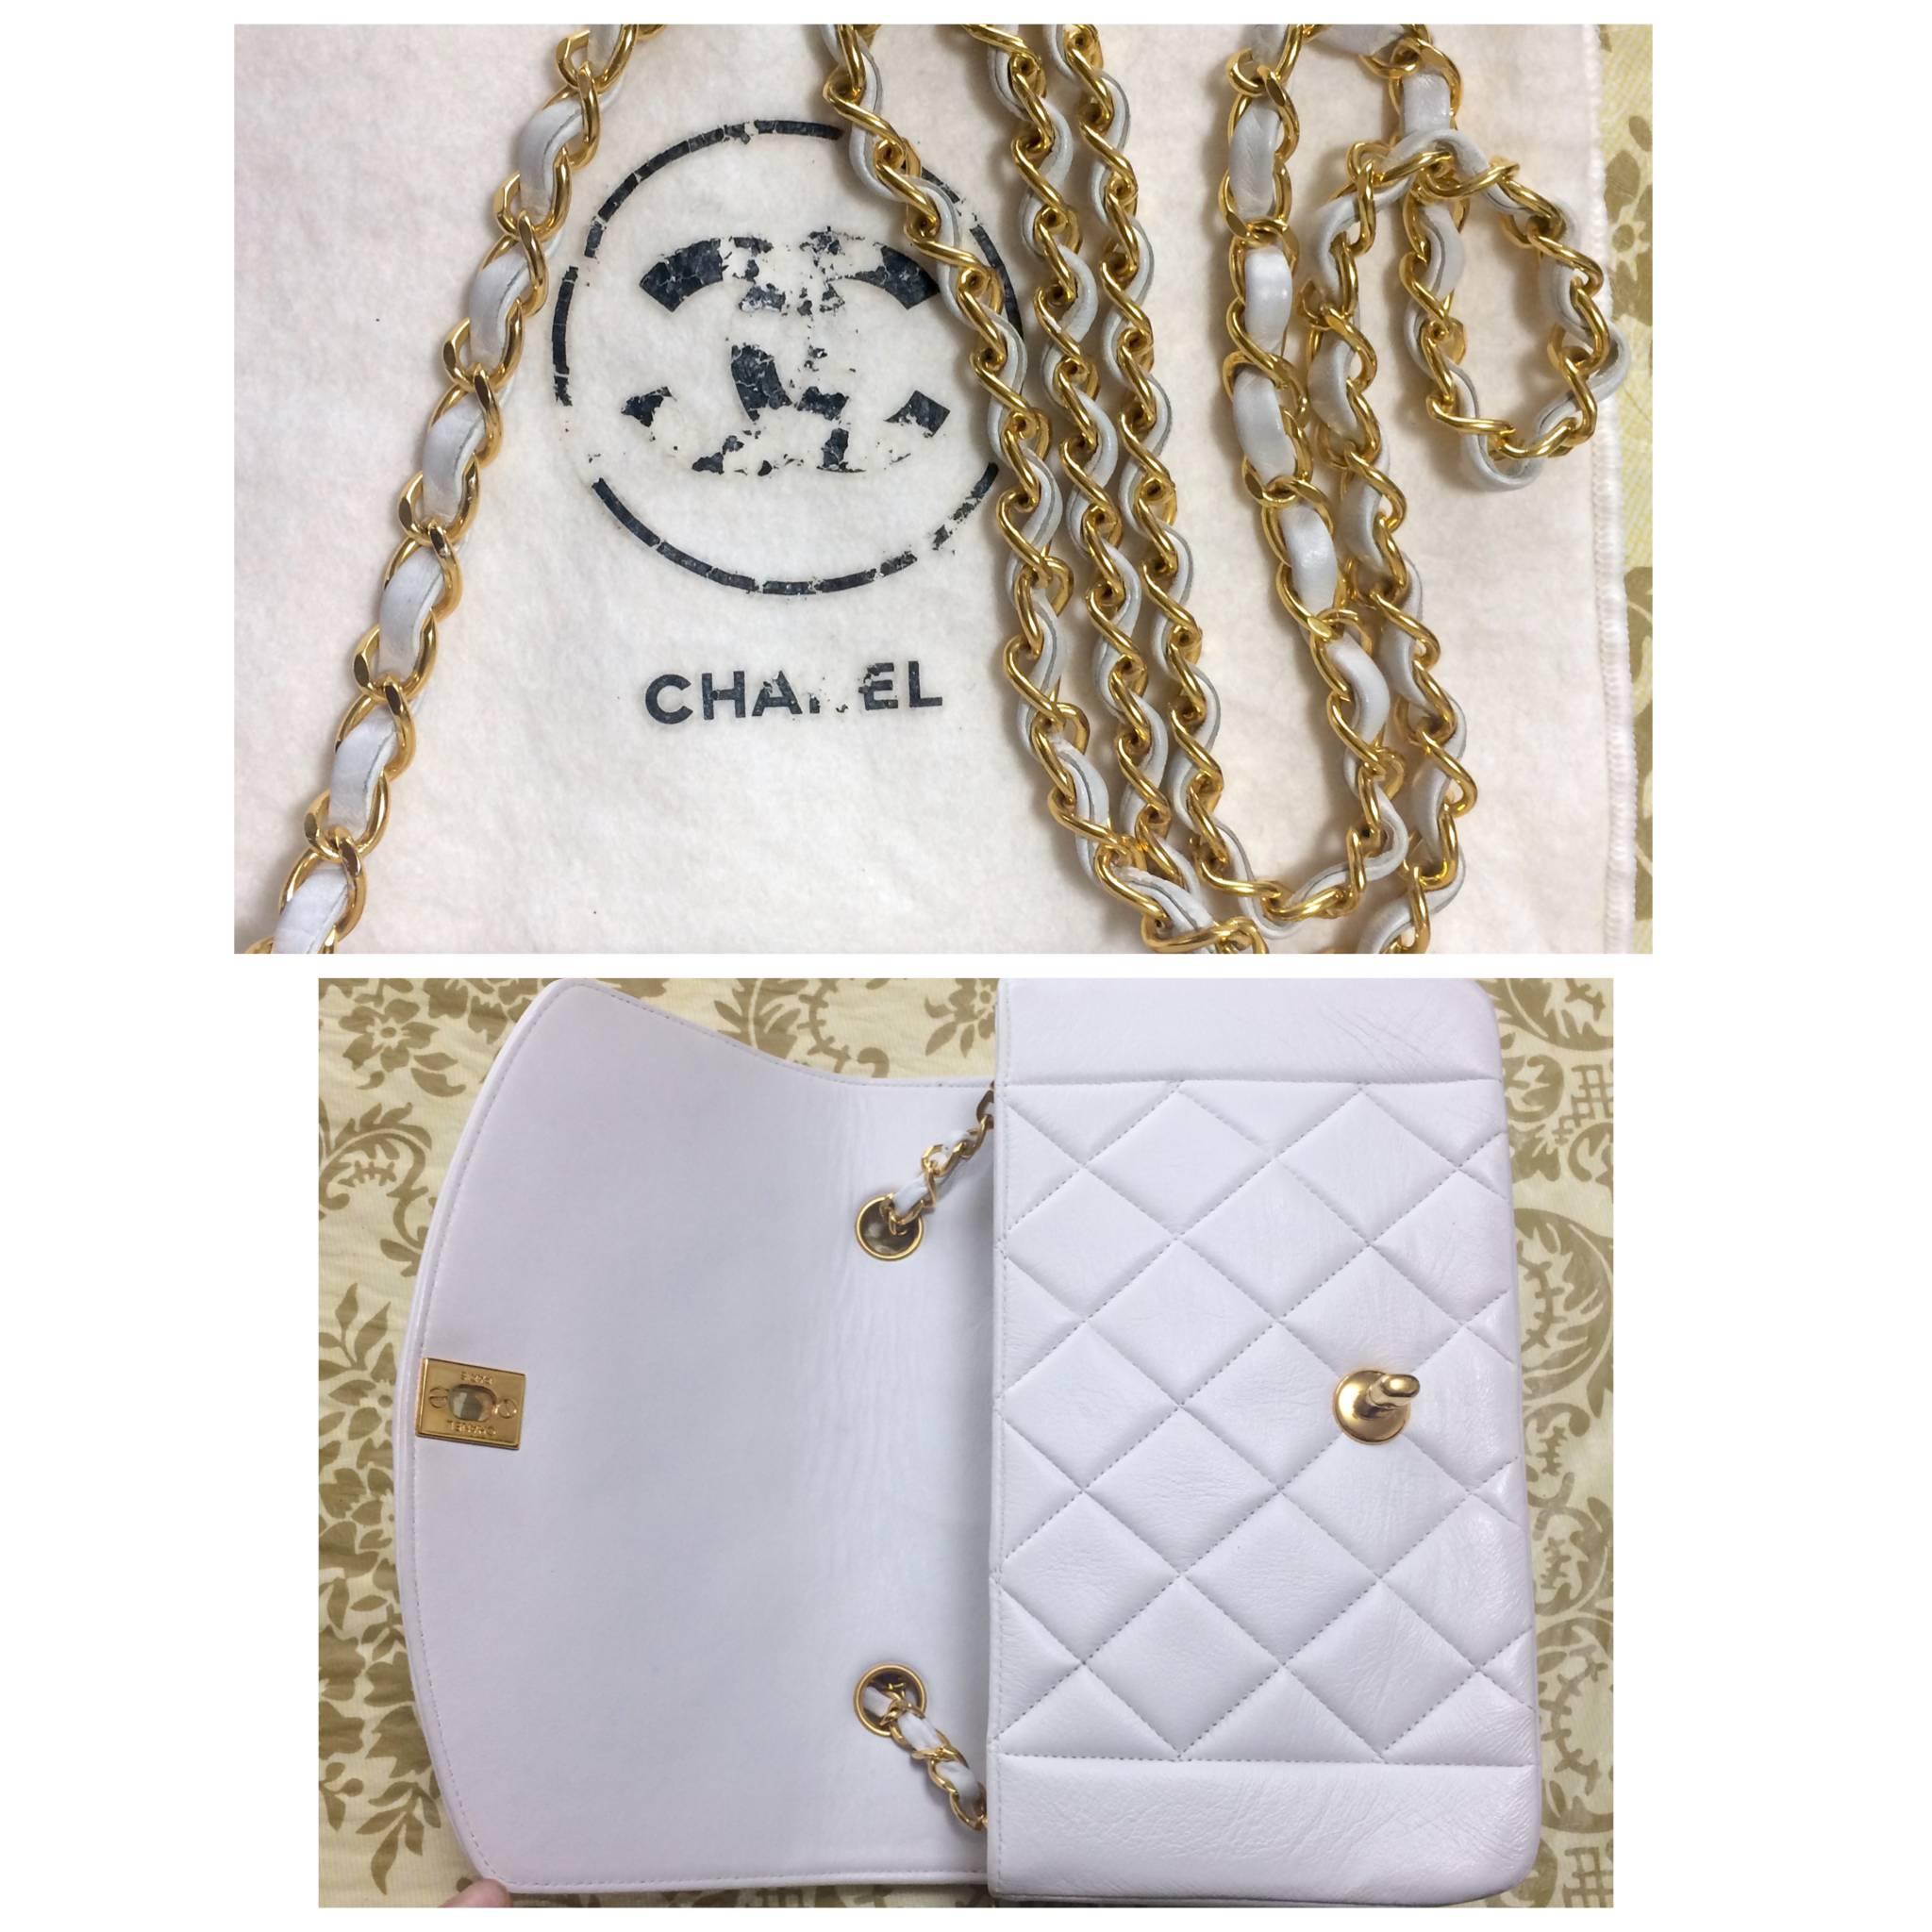 Vintage Chanel classic 2.55 white color lamb leather shoulder bag with gold CC. 2